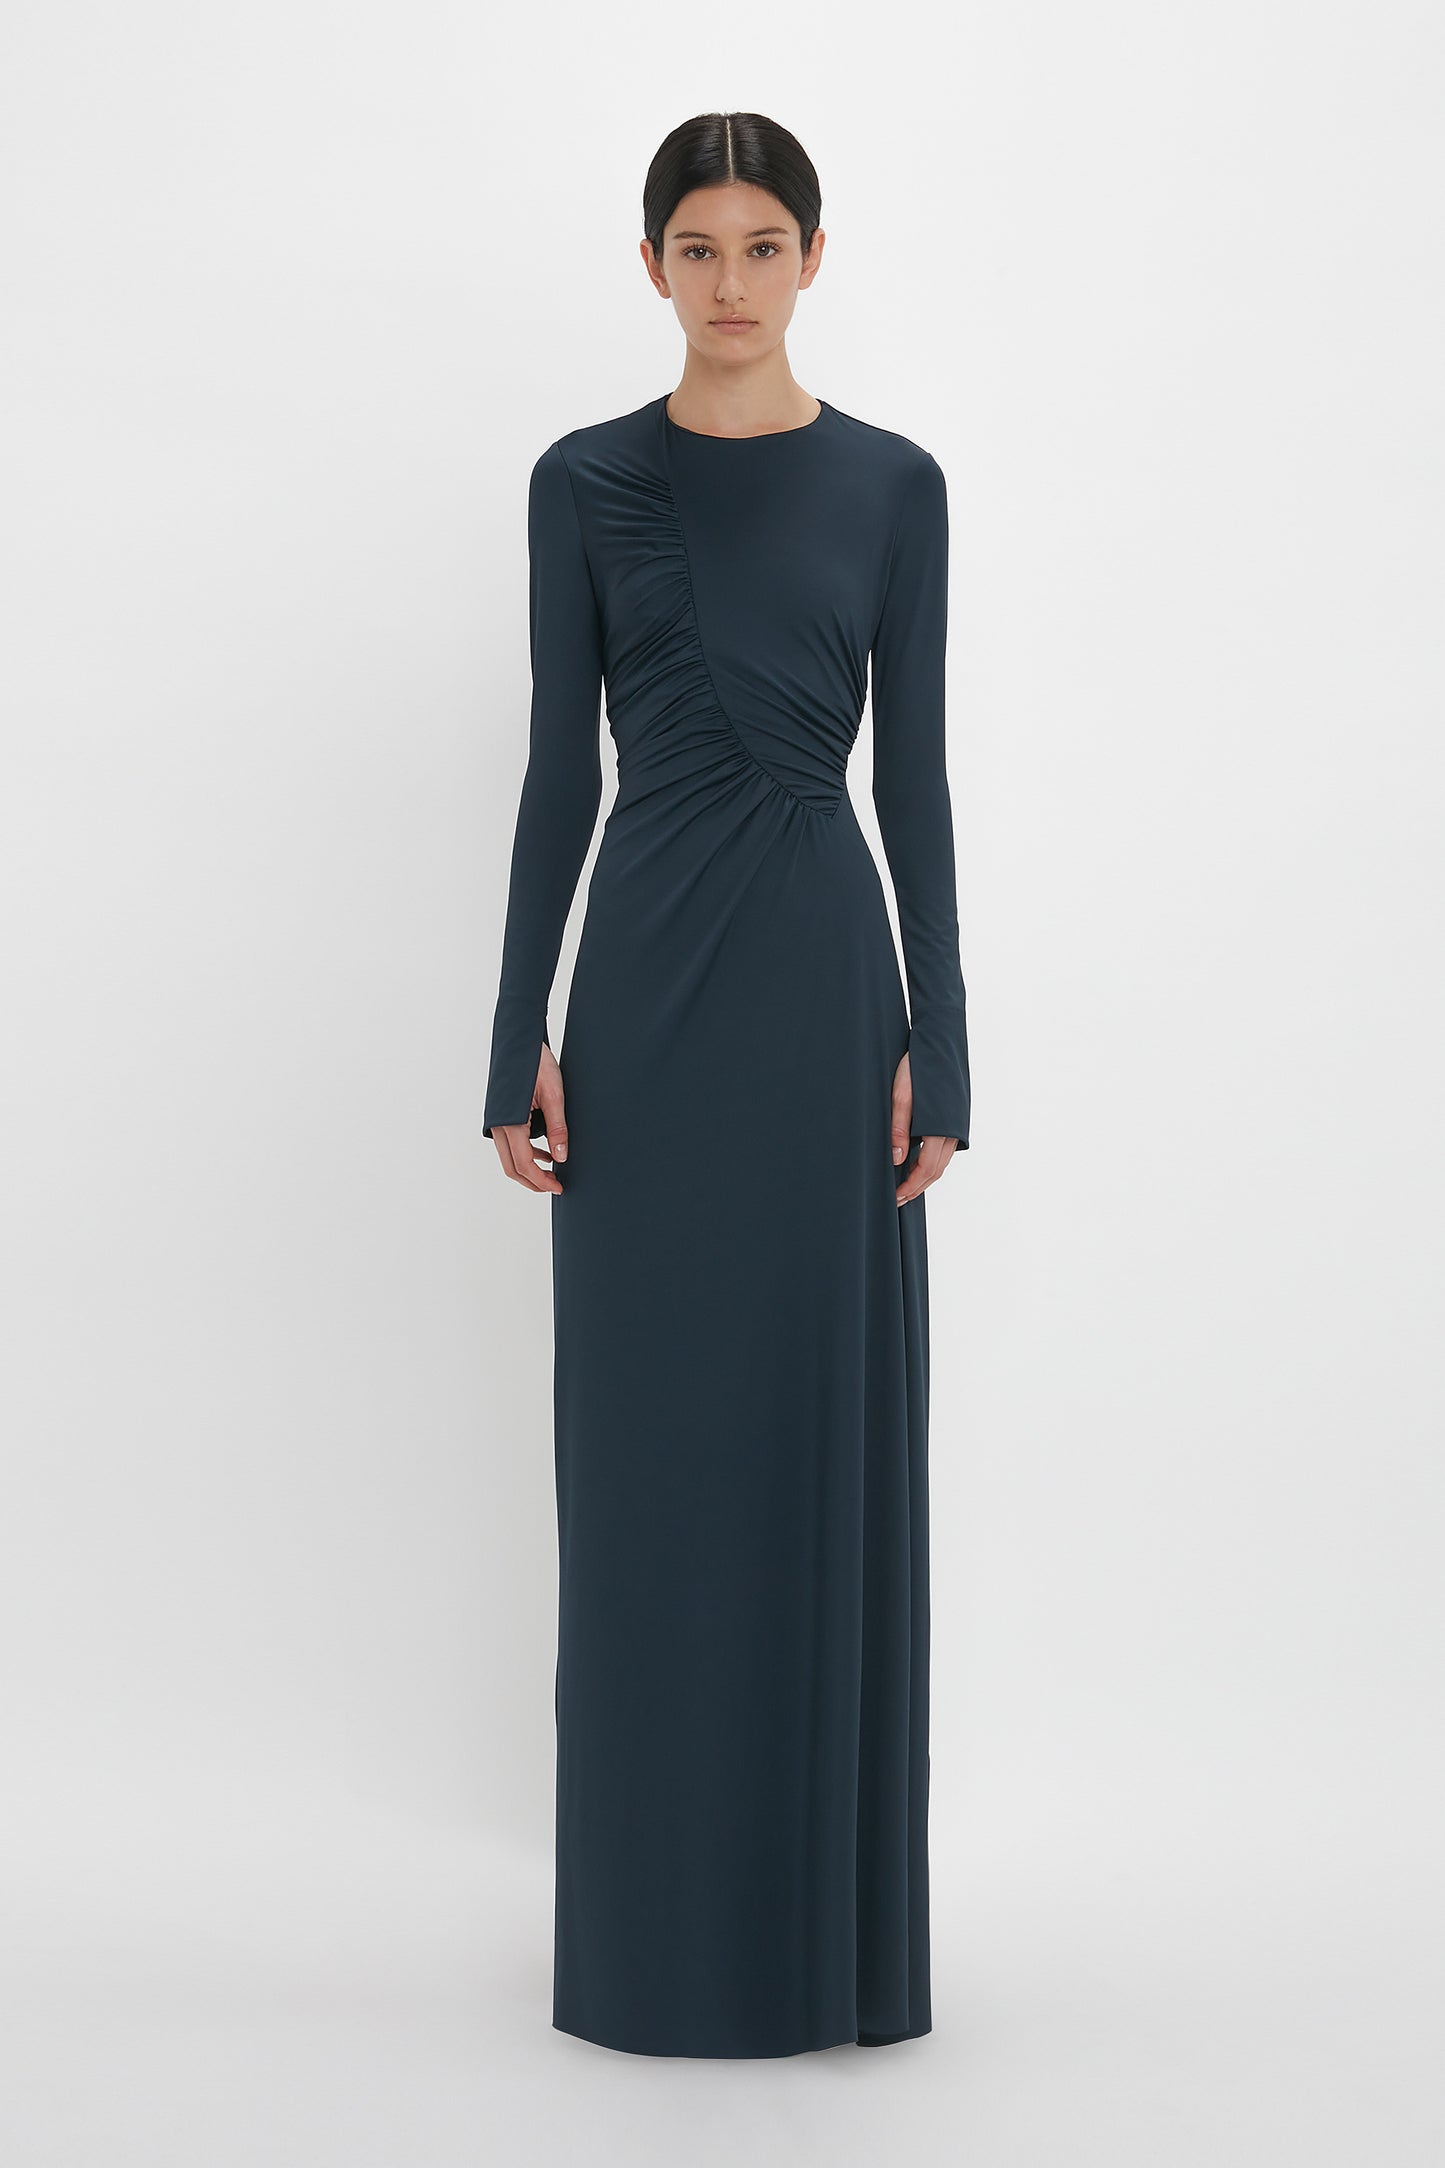 Person wearing a Victoria Beckham Ruched Detail Floor-Length Gown In Midnight with long sleeves, standing against a plain white background.